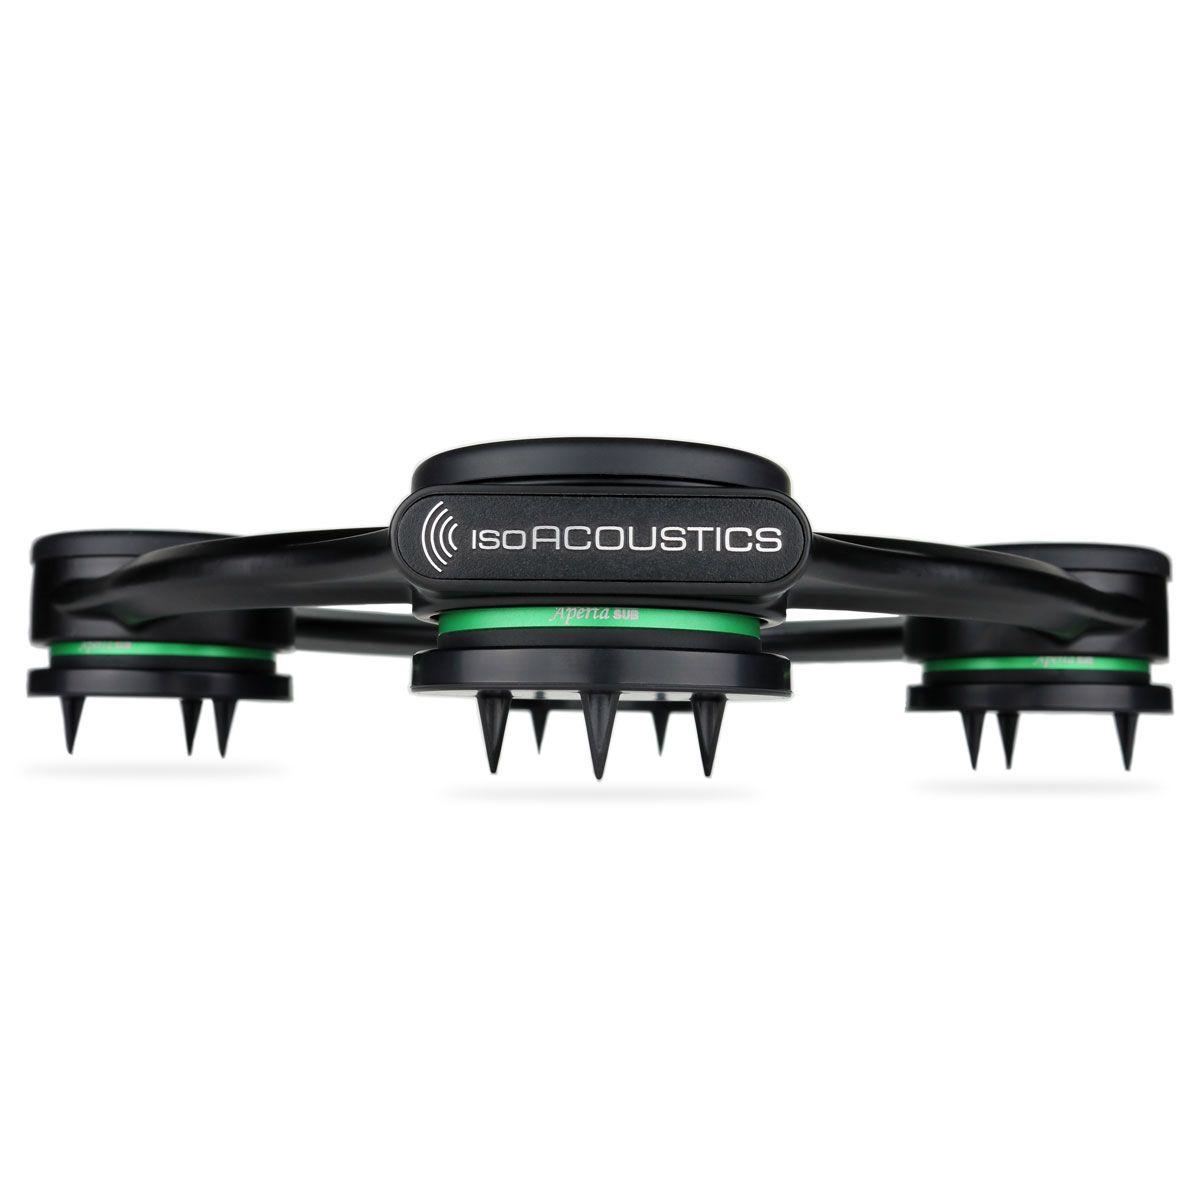 IsoAcoustics Aperta Sub Subwoofer Isolation Stand, head on with carpet spikes